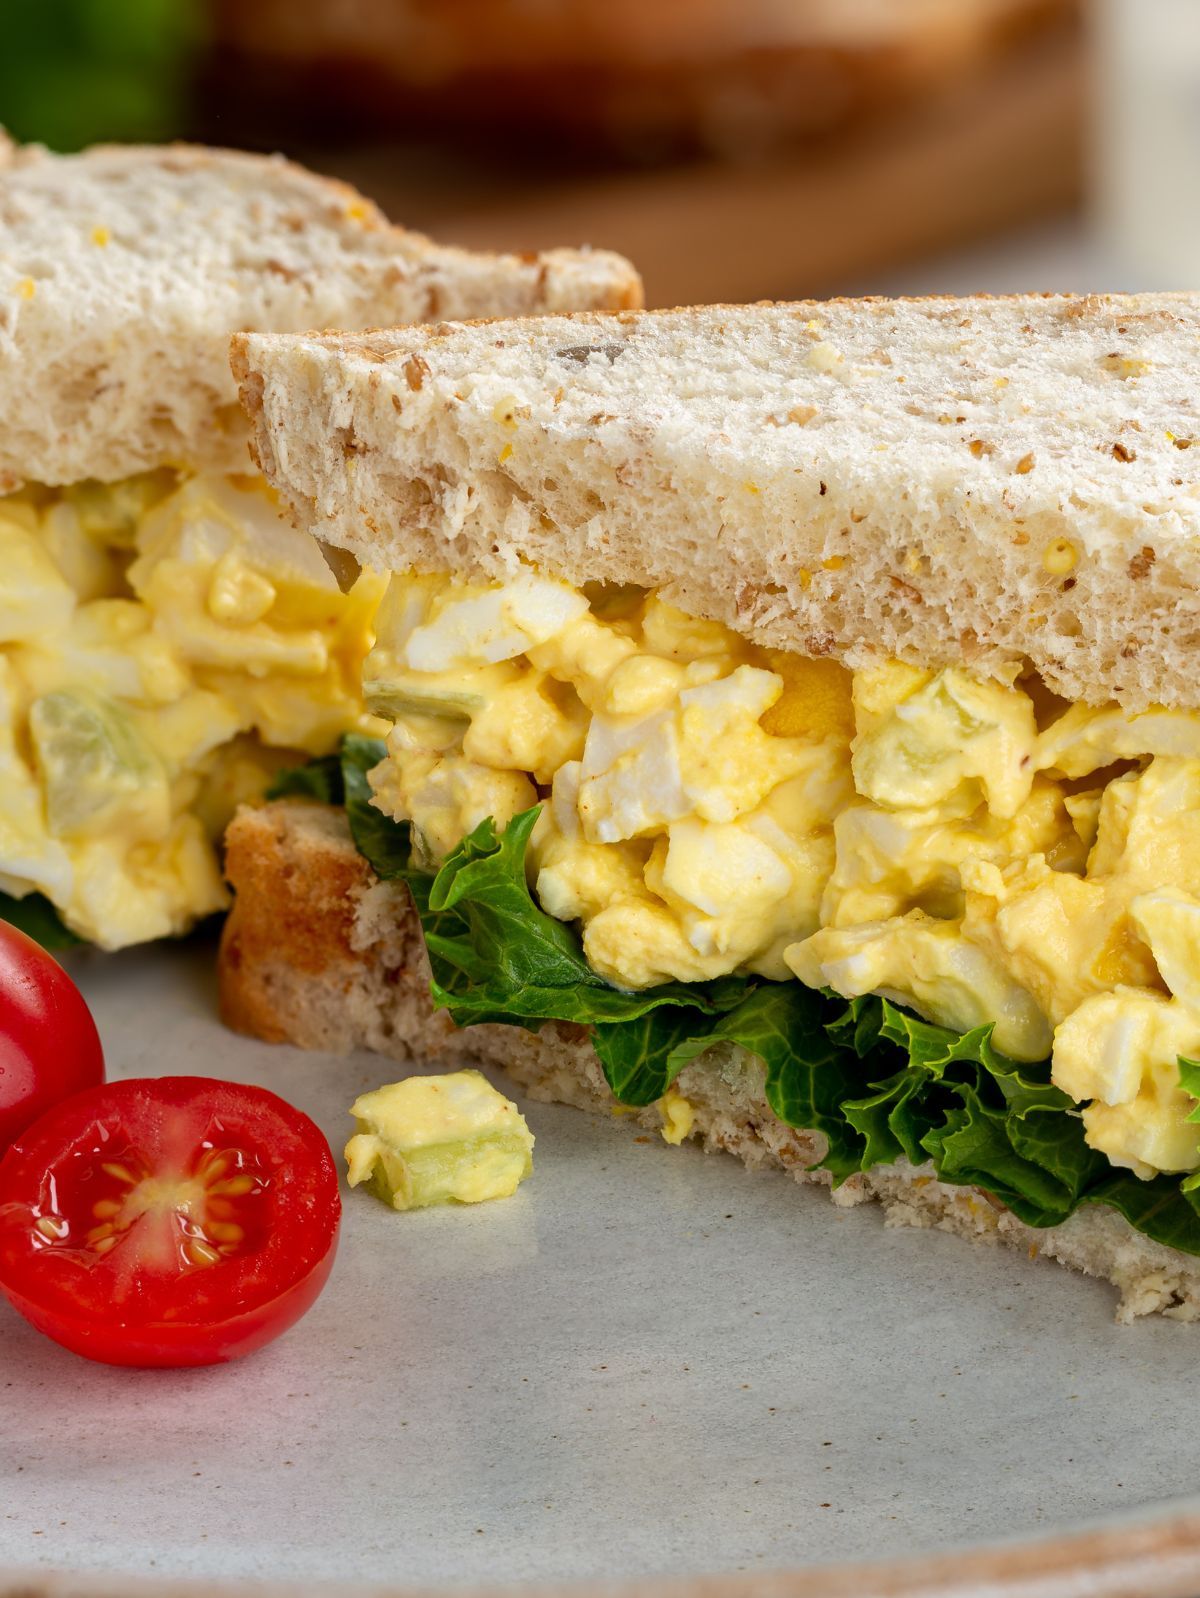 egg salad on bread with lettuce